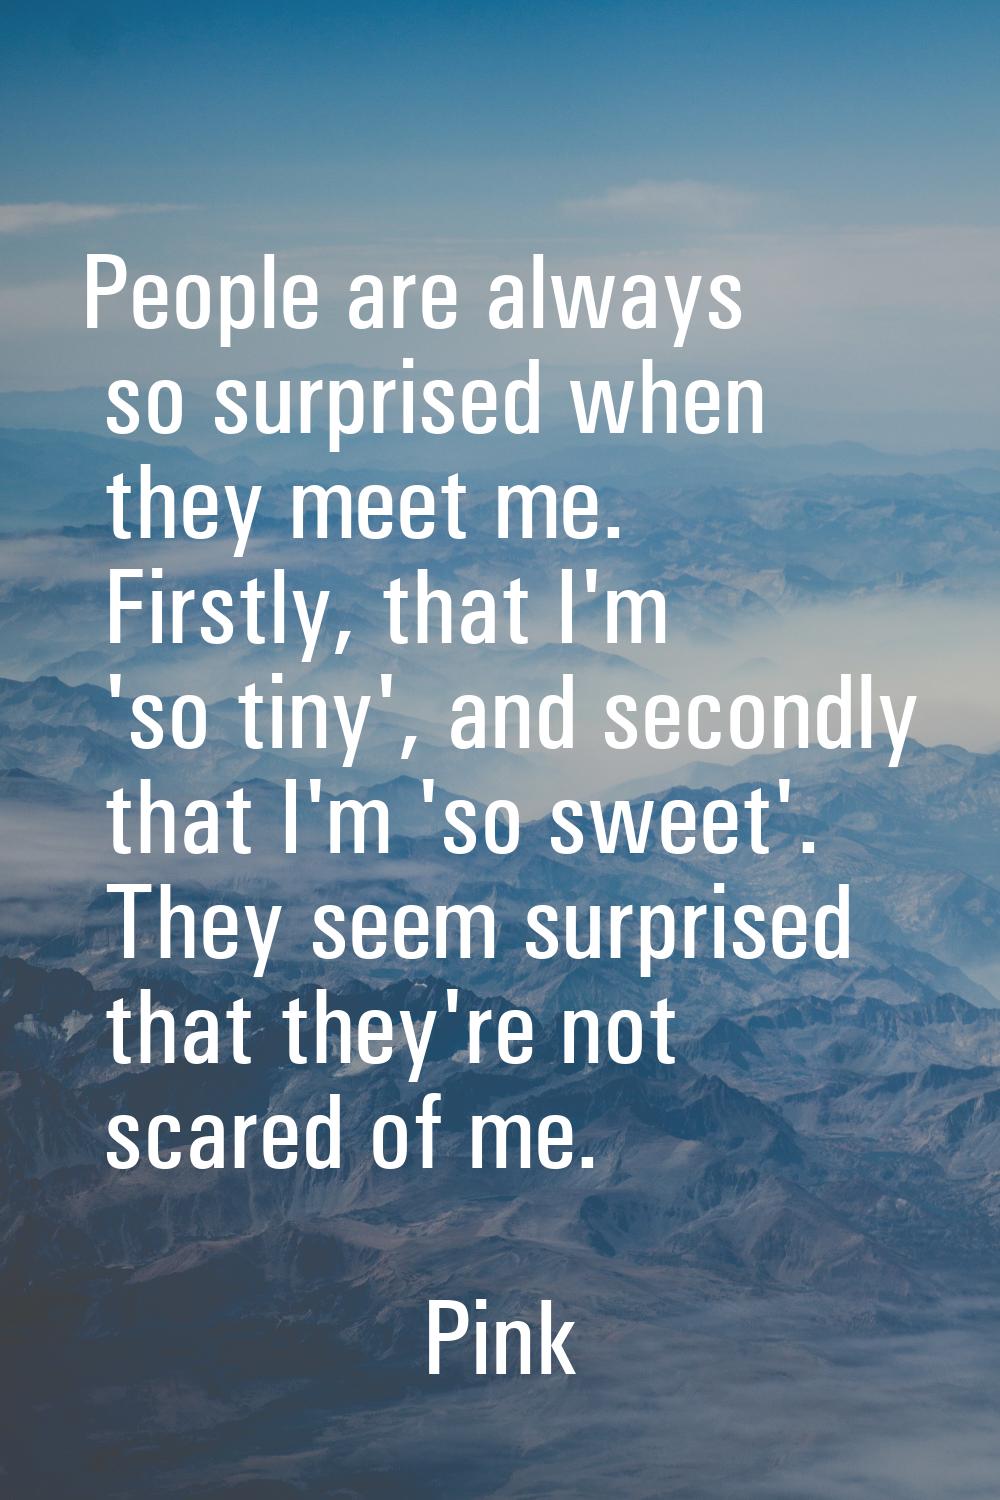 People are always so surprised when they meet me. Firstly, that I'm 'so tiny', and secondly that I'